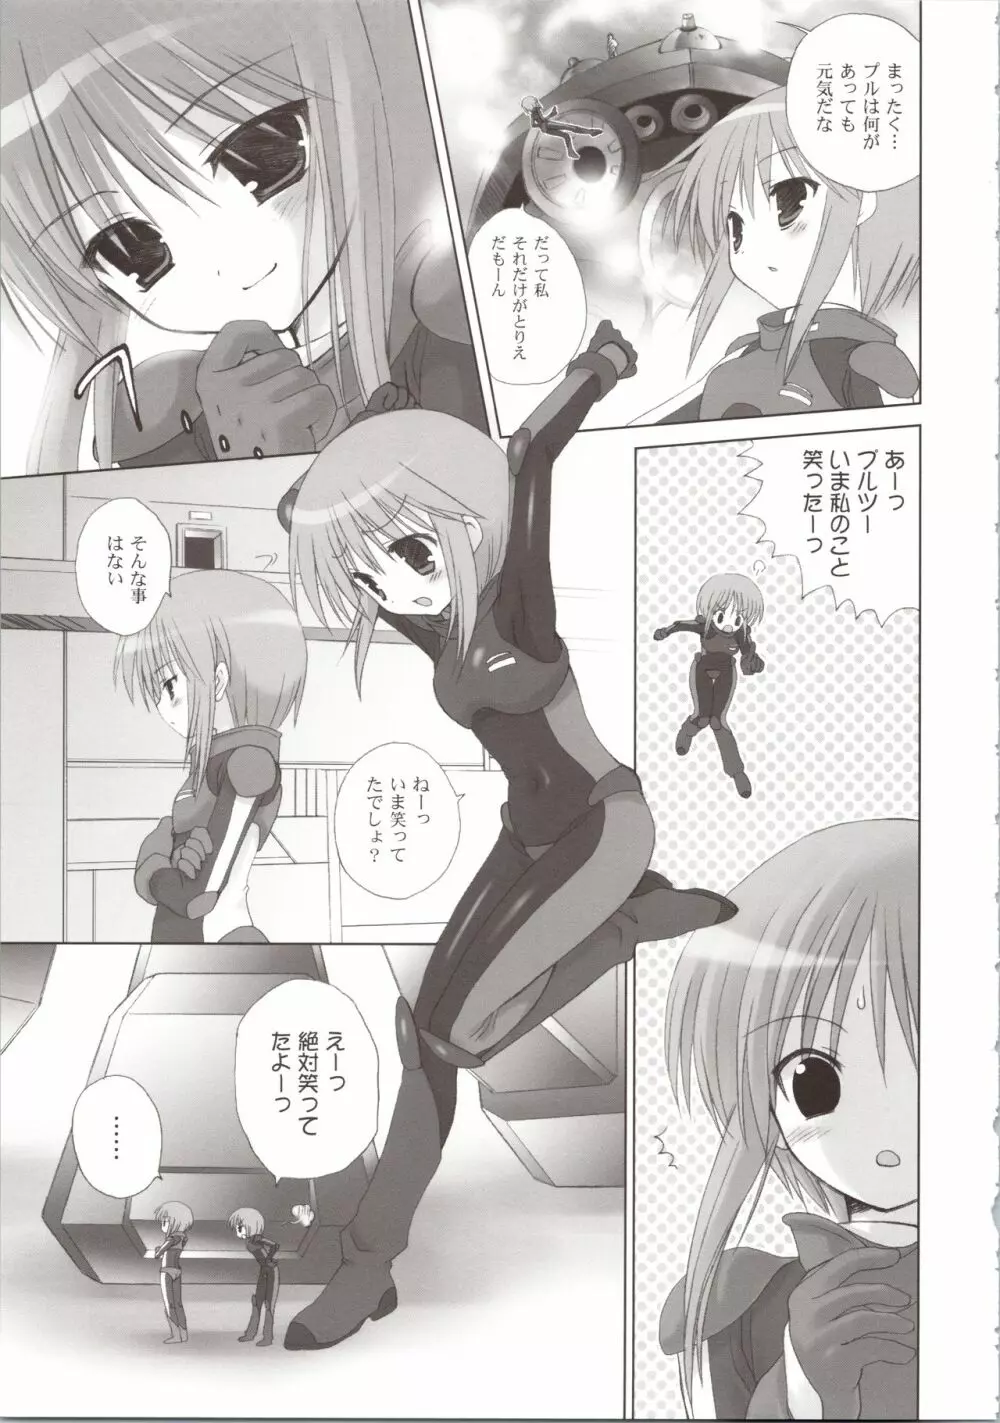 ELPEO-PLE GENERATION EVENT LIMITED EDITION - page25